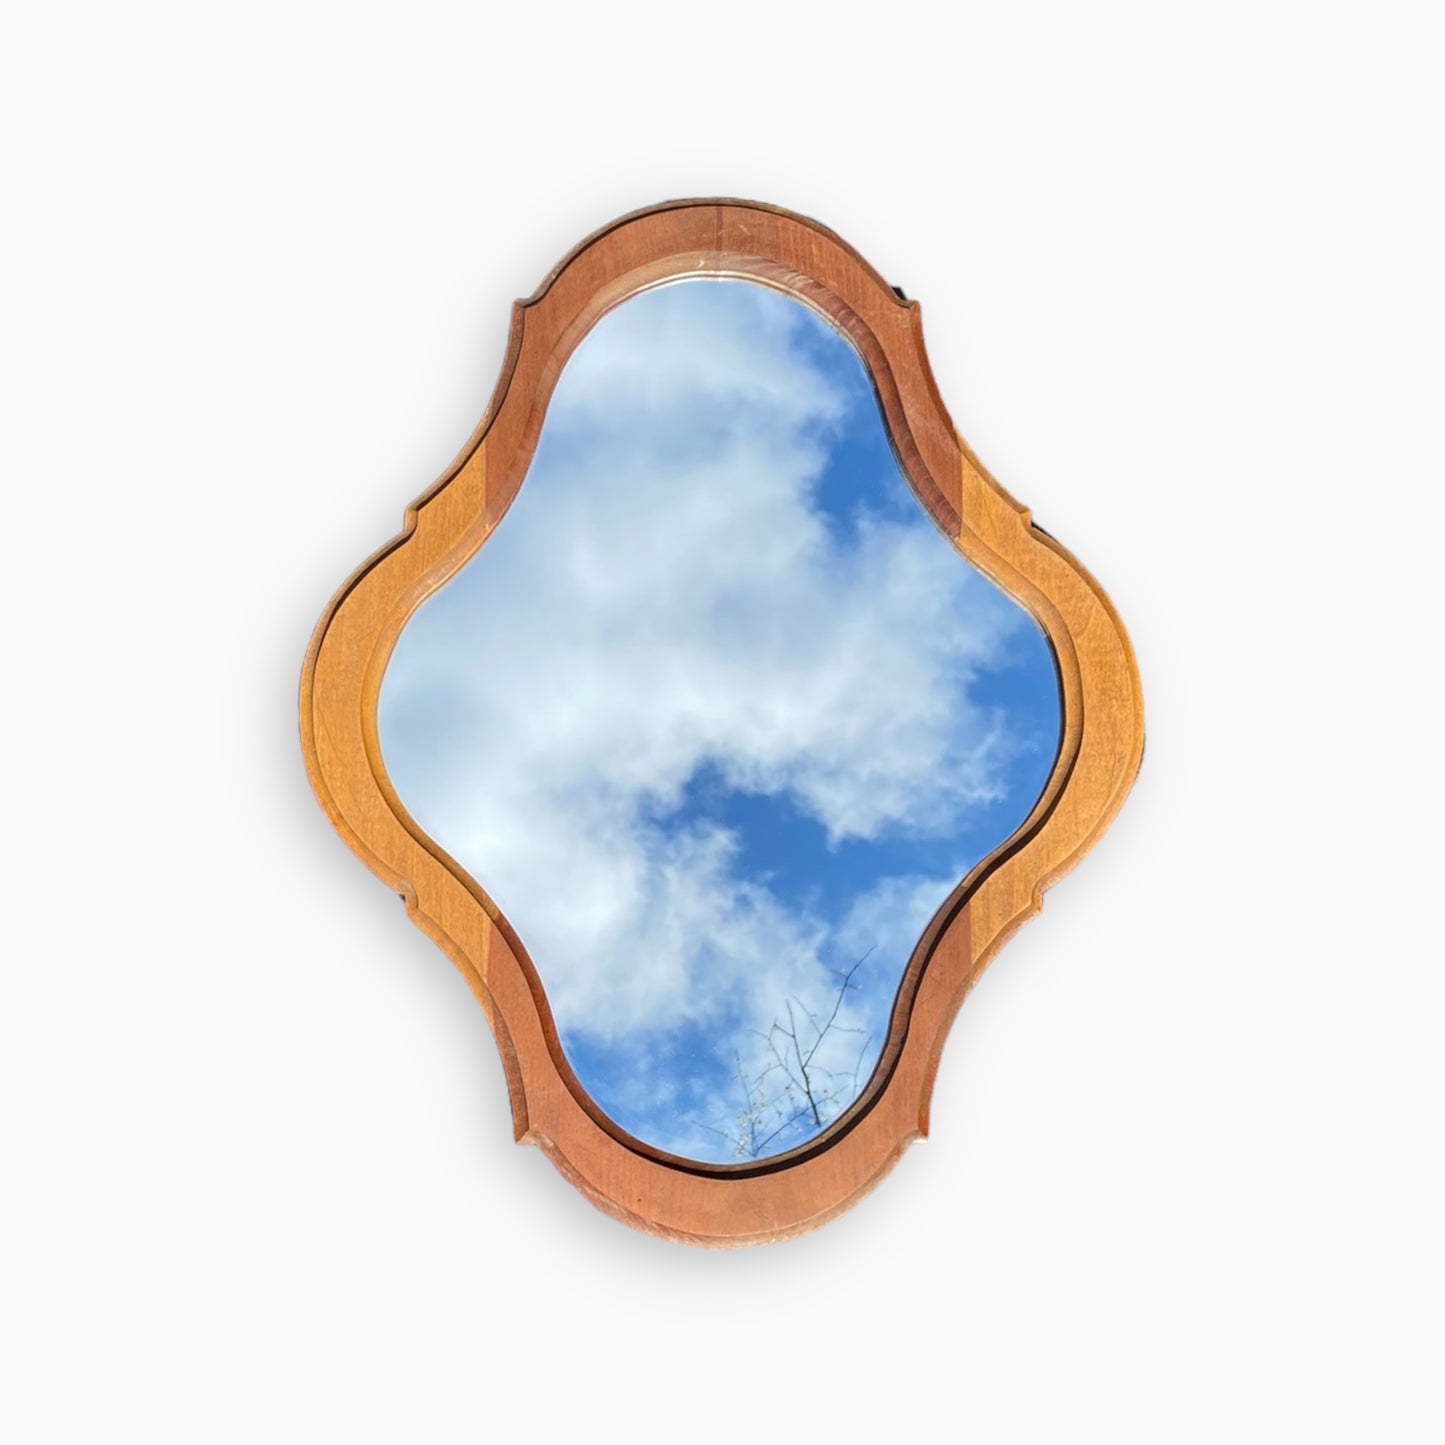 HAND-CRAFTED WALL MIRROR